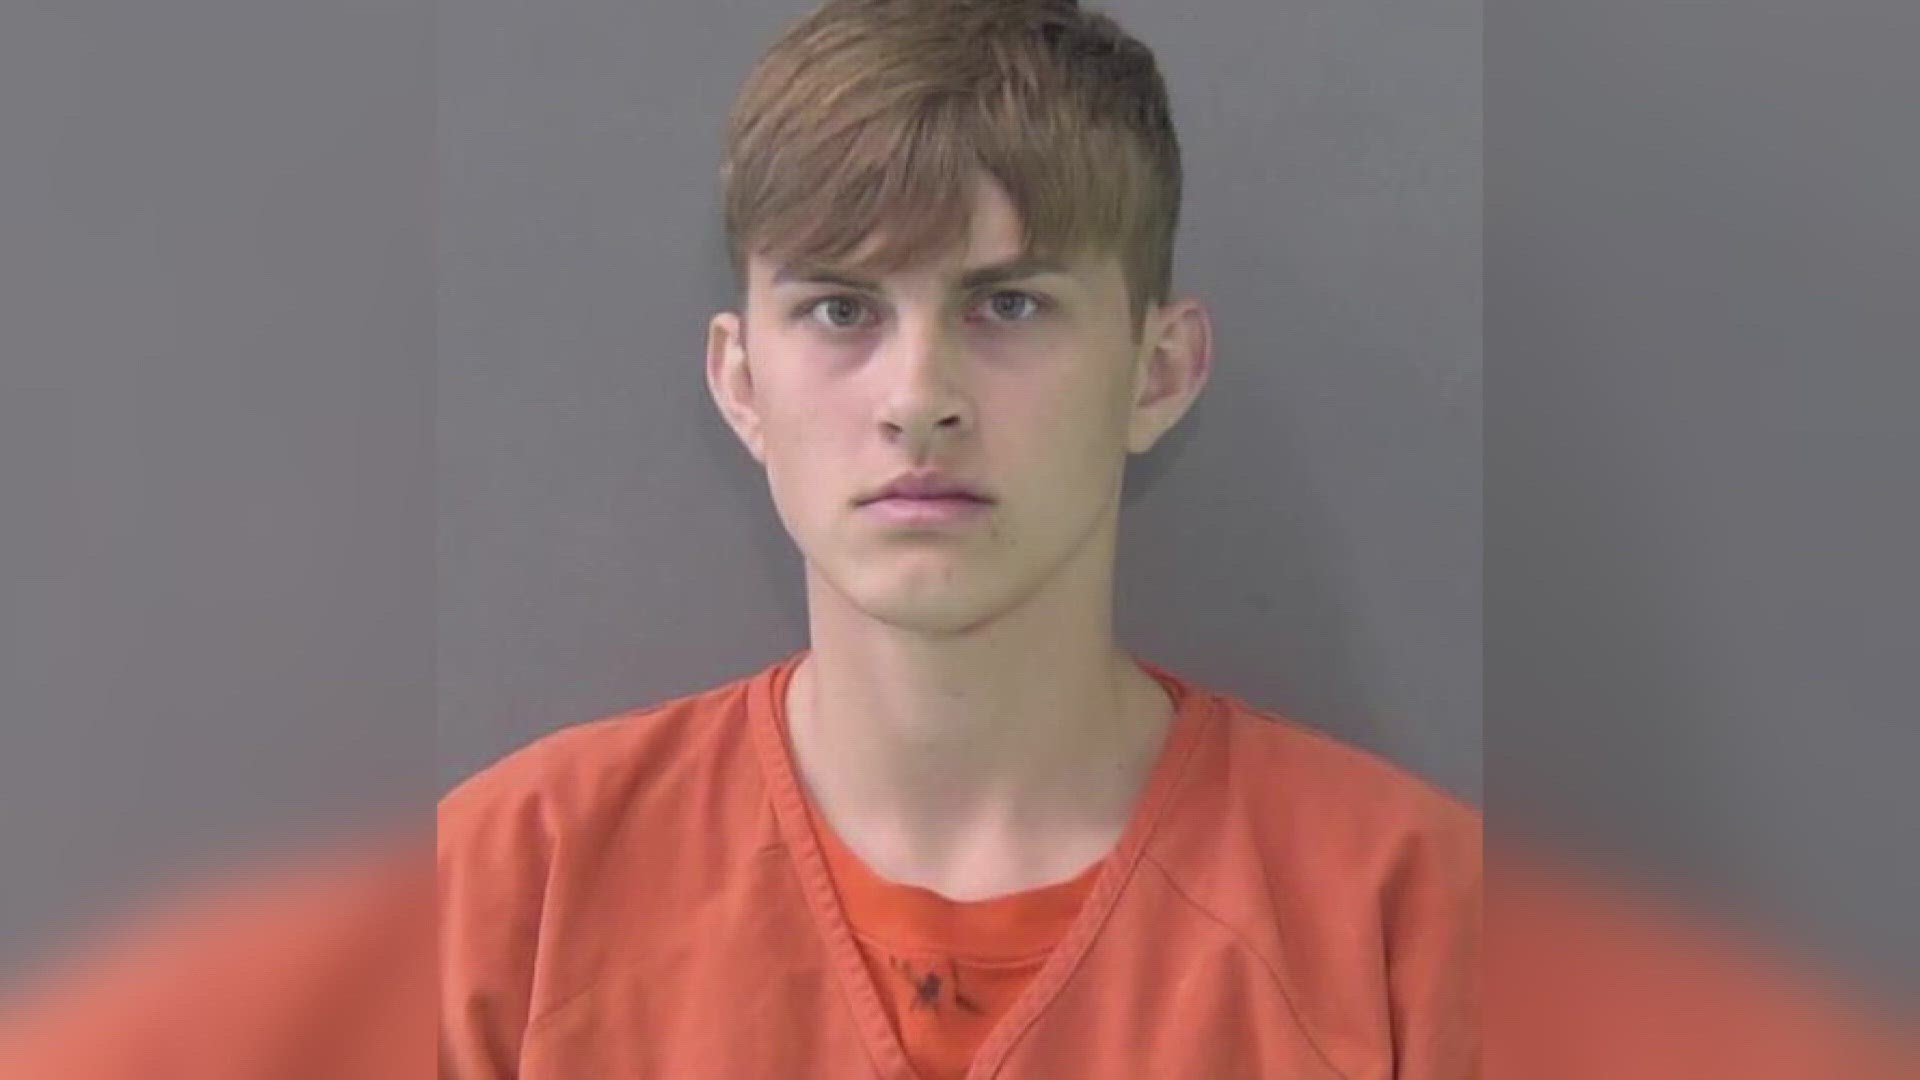 Caysen Allison, 18, reportedly stabbed and killed 18-year-old Jose Rodriguez in May 2022 at Belton High School.